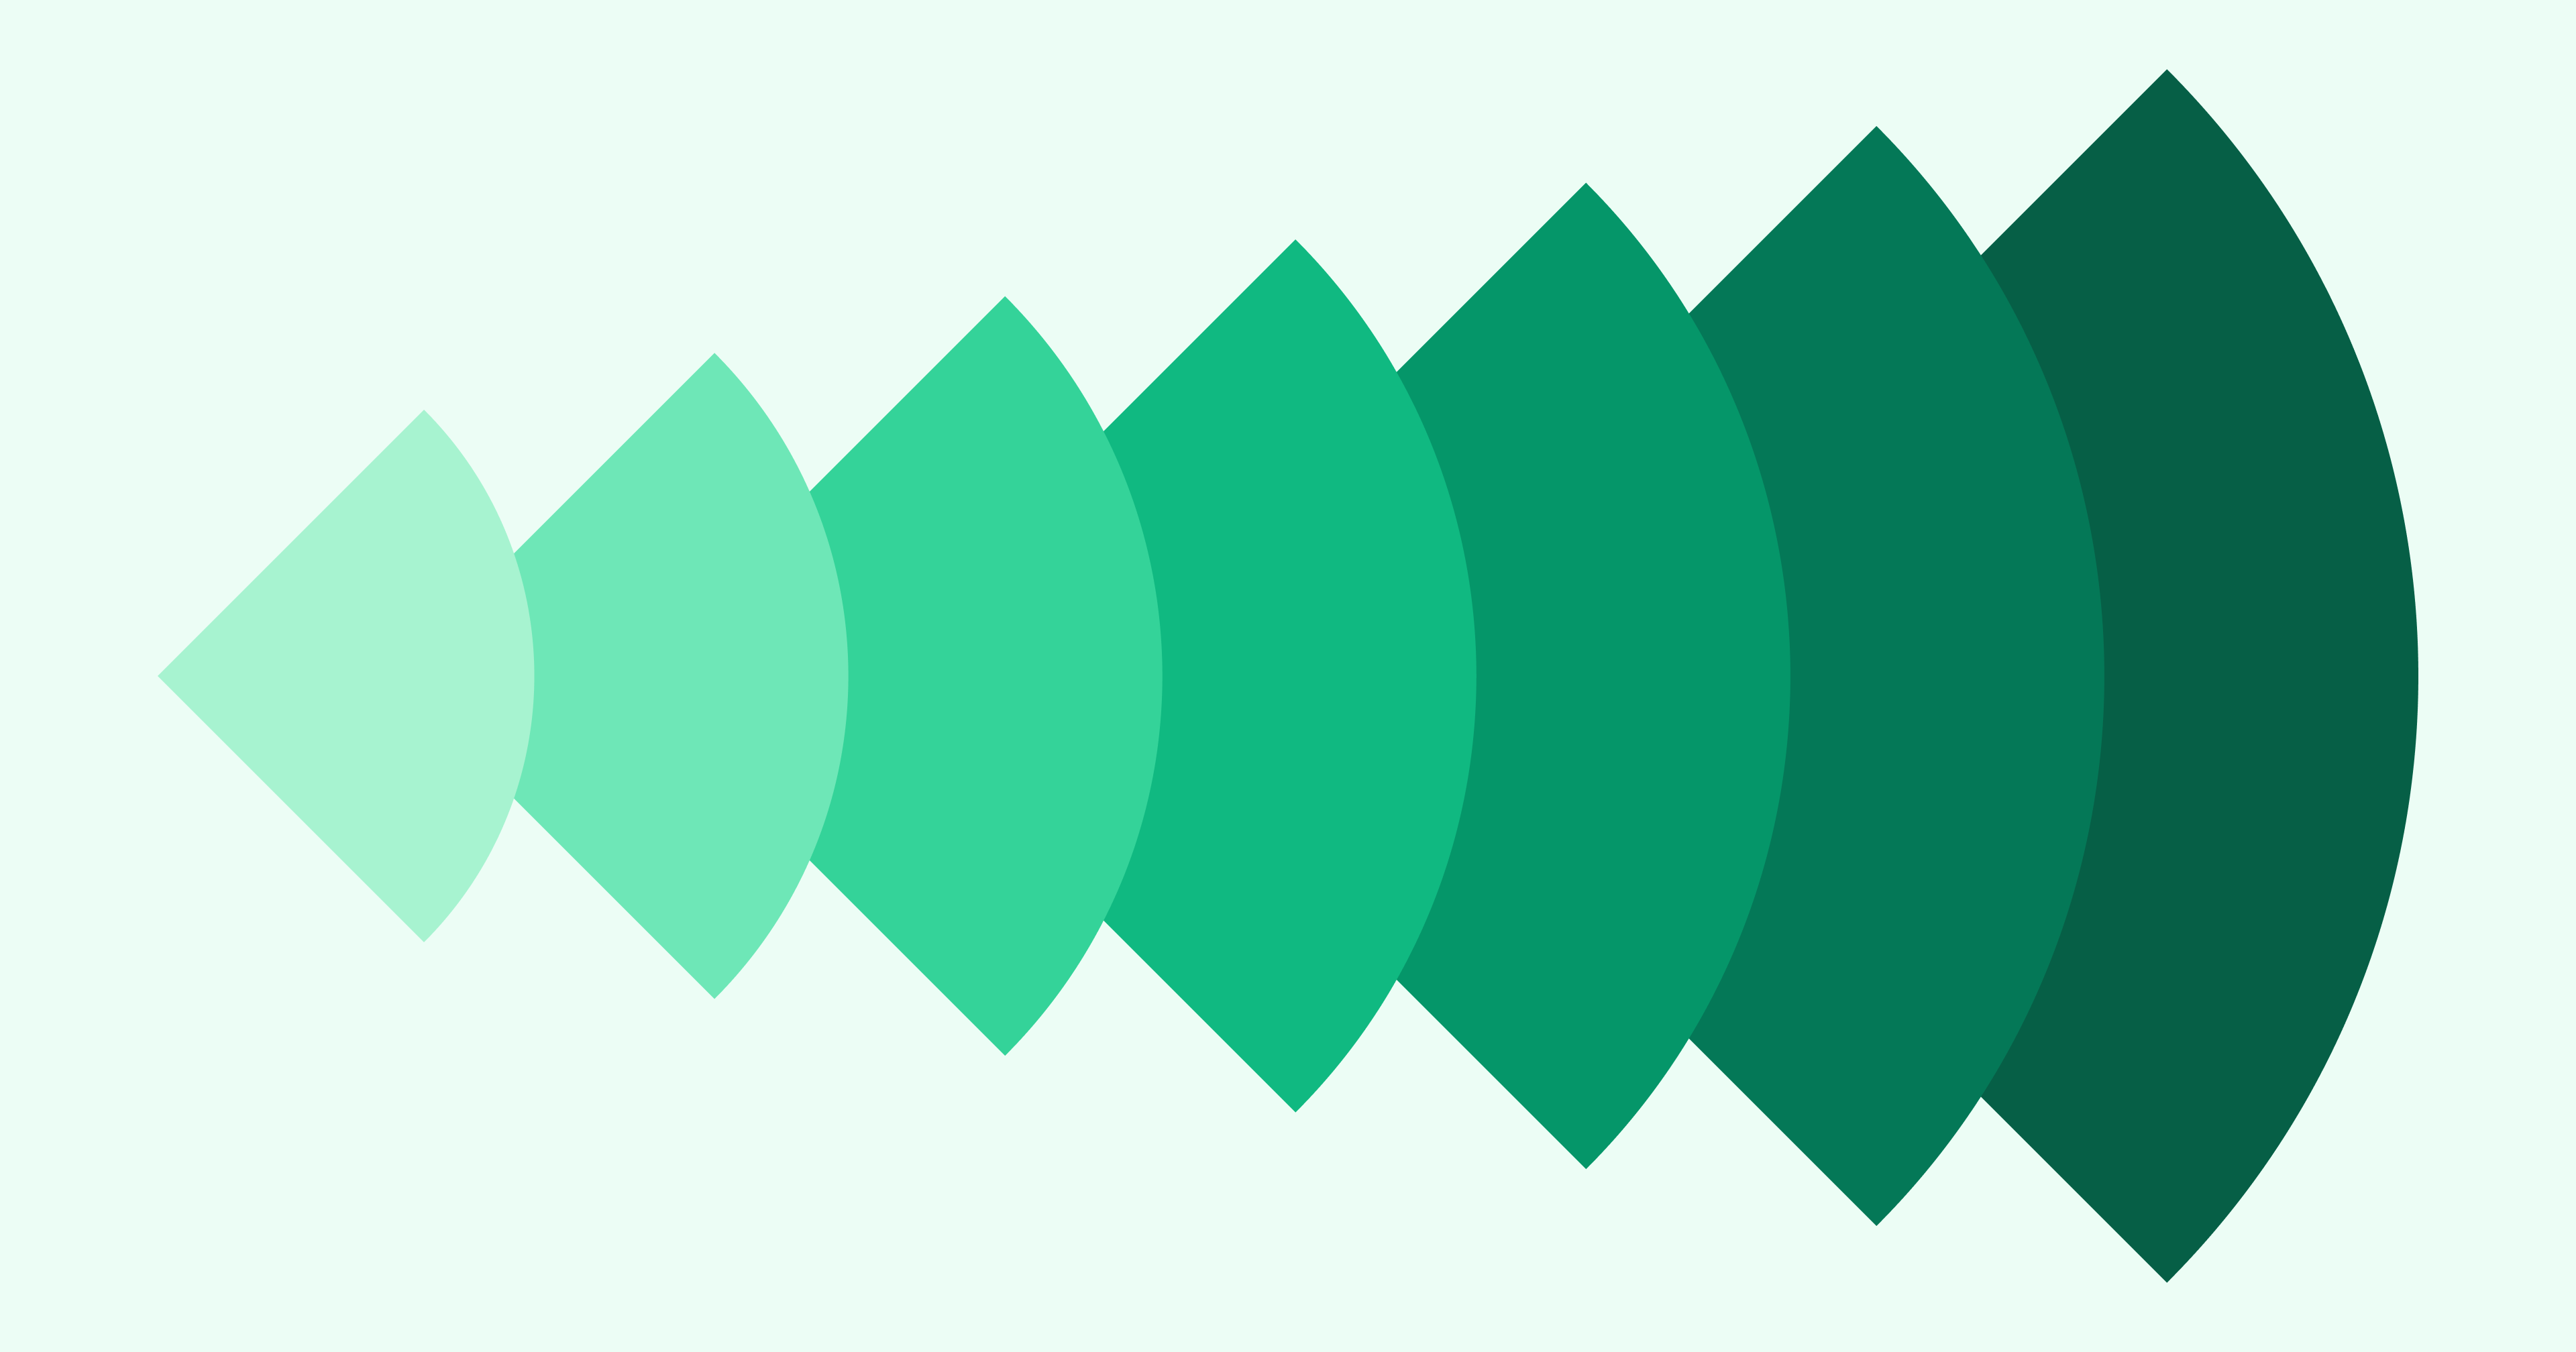 abstract design with green quarter circles